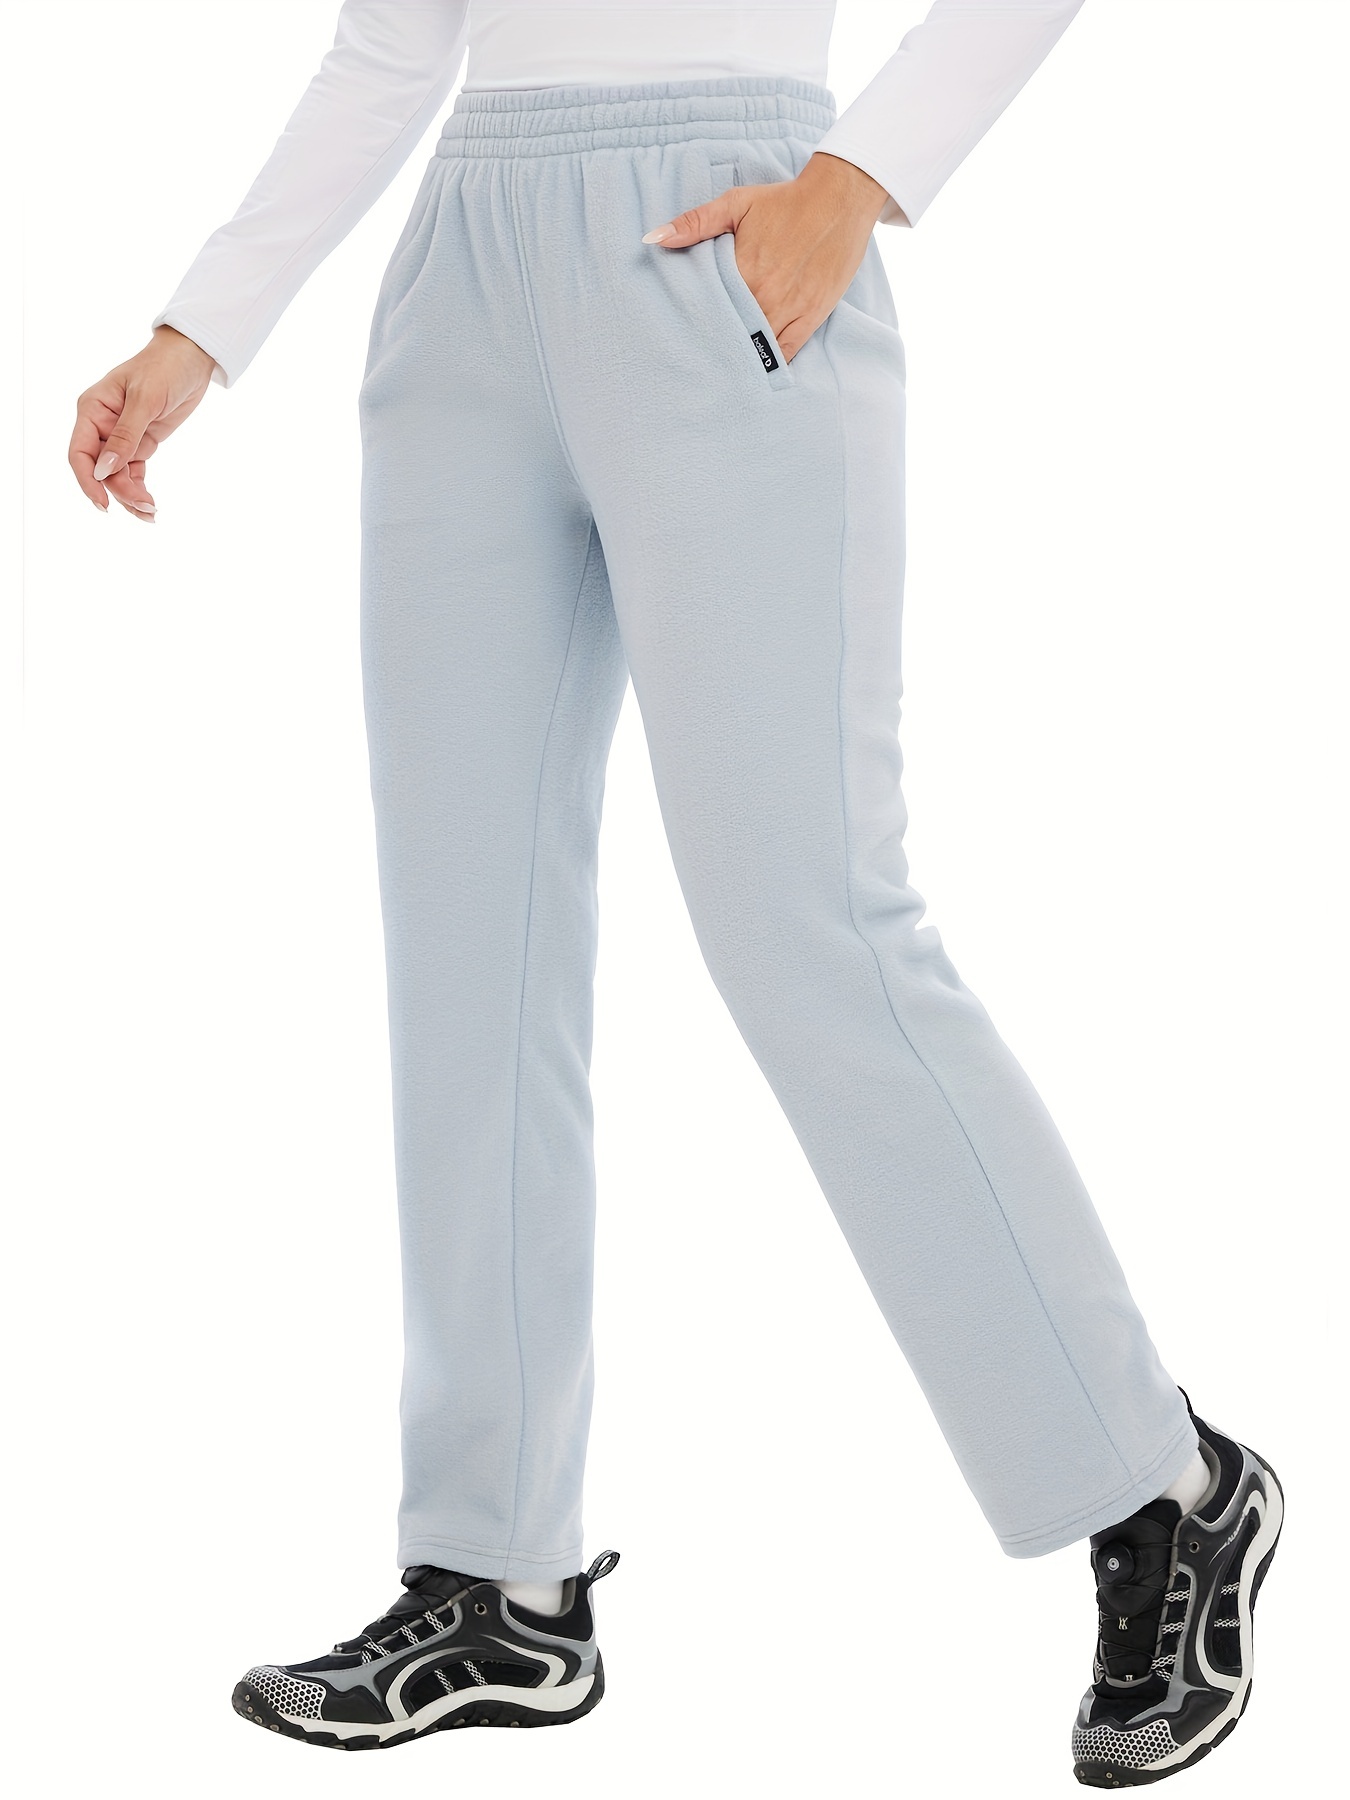 Womens Winter Fleece Lightweight Casual Sweatpants Elastic Cozy Long Pants  With Pocket, Shop The Latest Trends